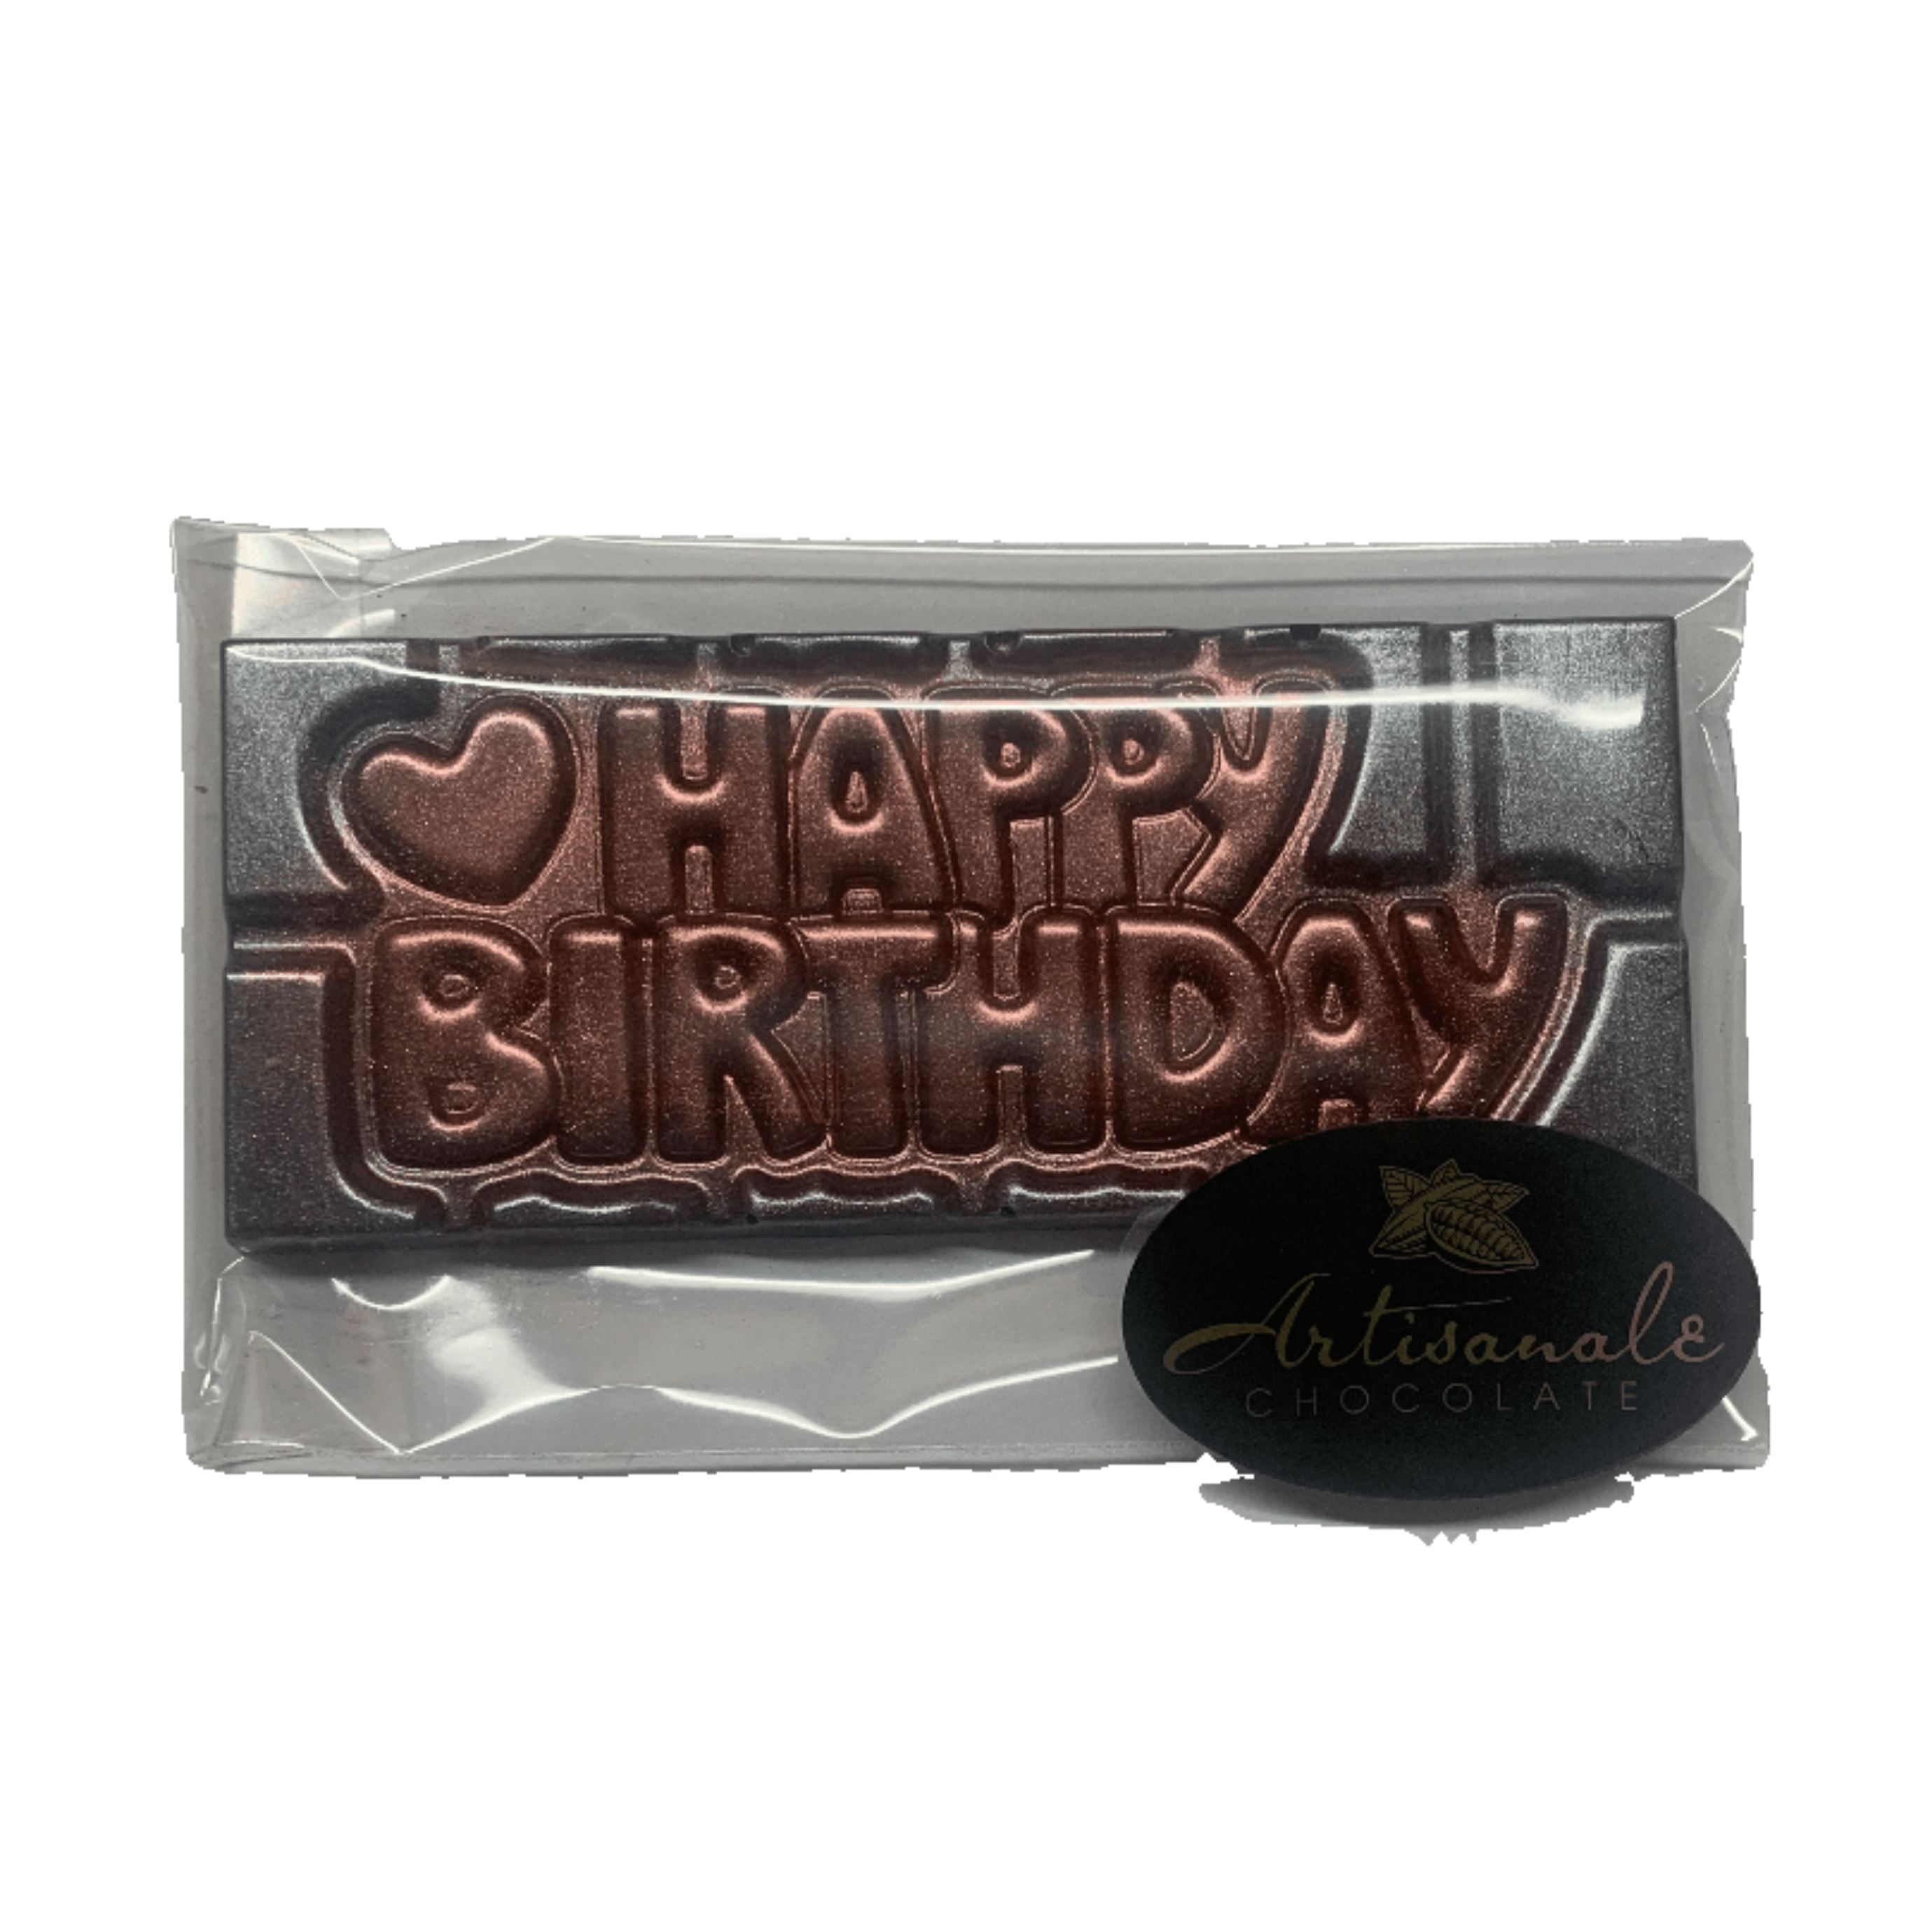 Say_Happy_Birthday_Wrapped-min.png